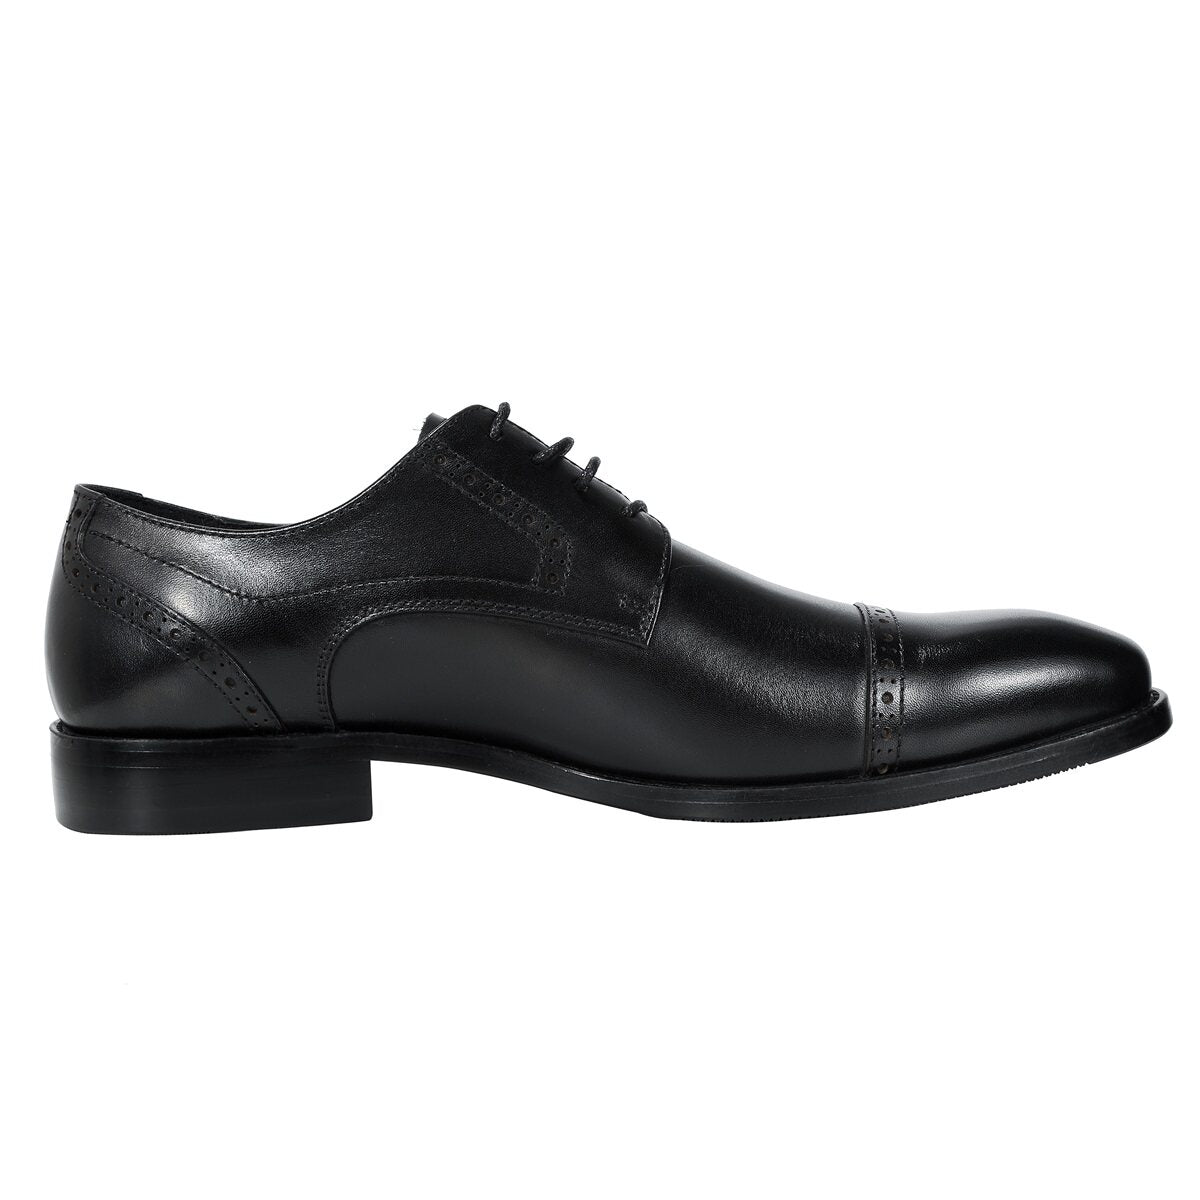 Men's Three Joint Business Formal Breathable British Leather Shoes Black